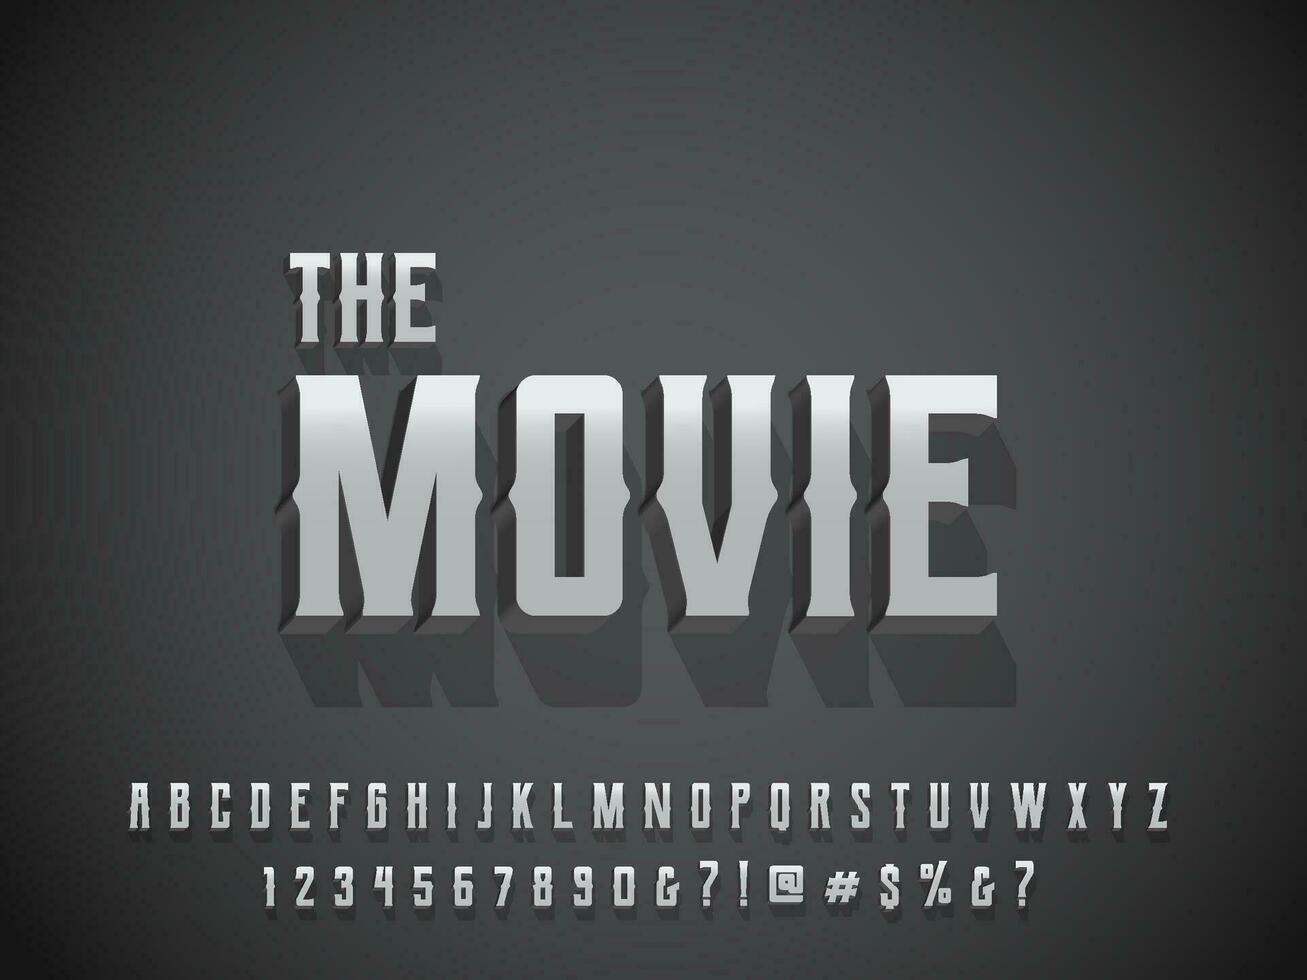 Old vintage movie text effect vector